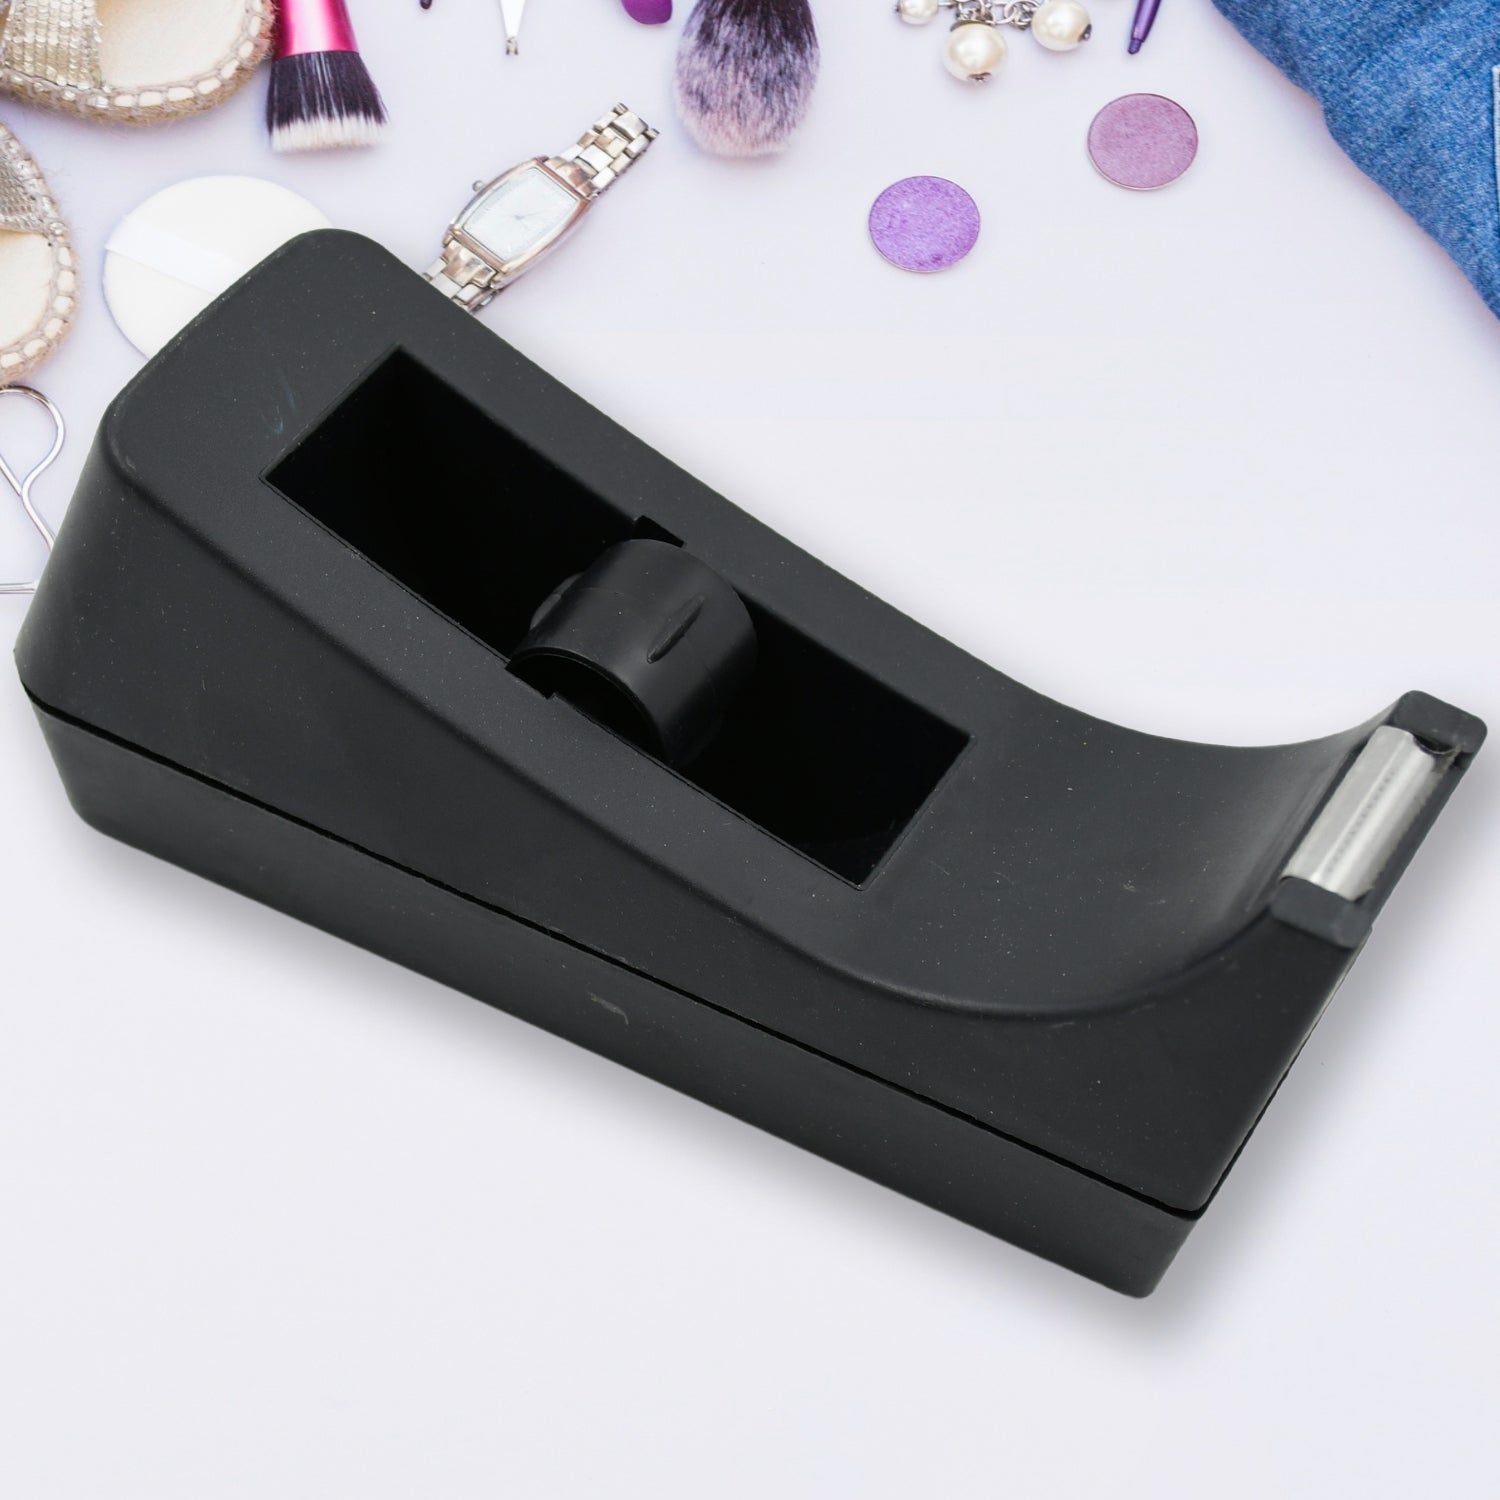 9512 Plastic Tape Dispenser Cutter for Home Office use, Tape Dispenser for Stationary, Tape Cutter Packaging Tape School Supplies (1 pc / 464 Gm)